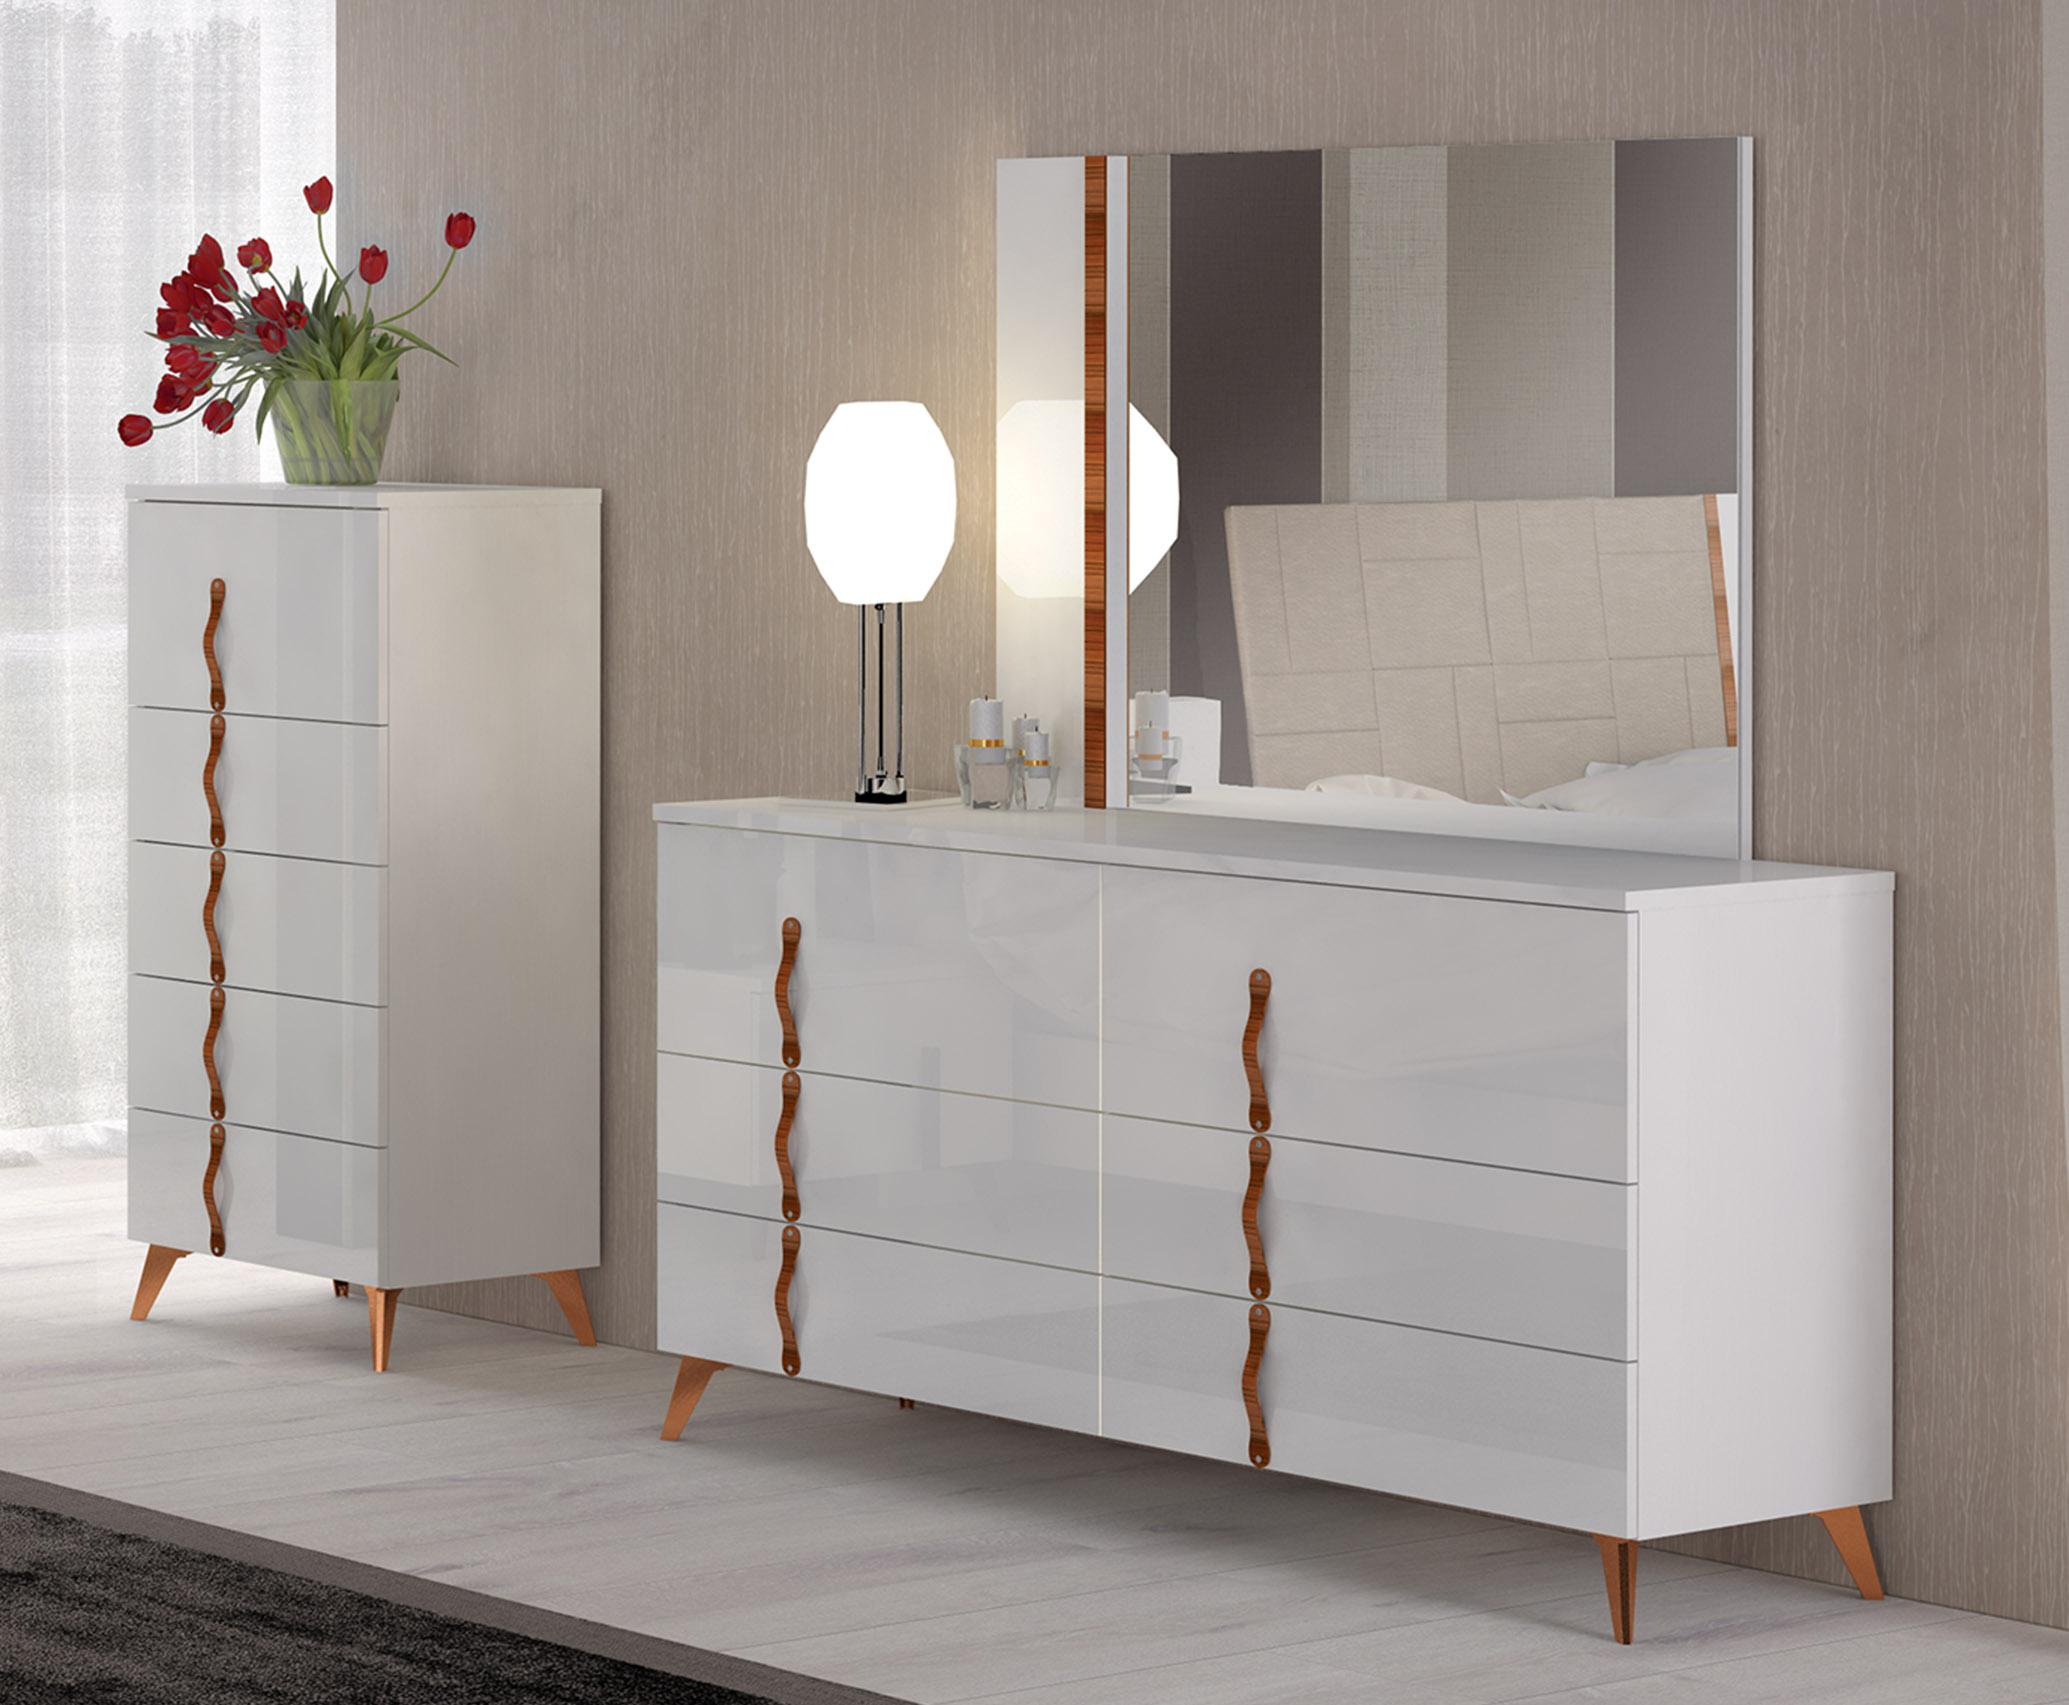 Made in Italy Leather Elite Modern Bedroom Sets with Extra Storage - Click Image to Close